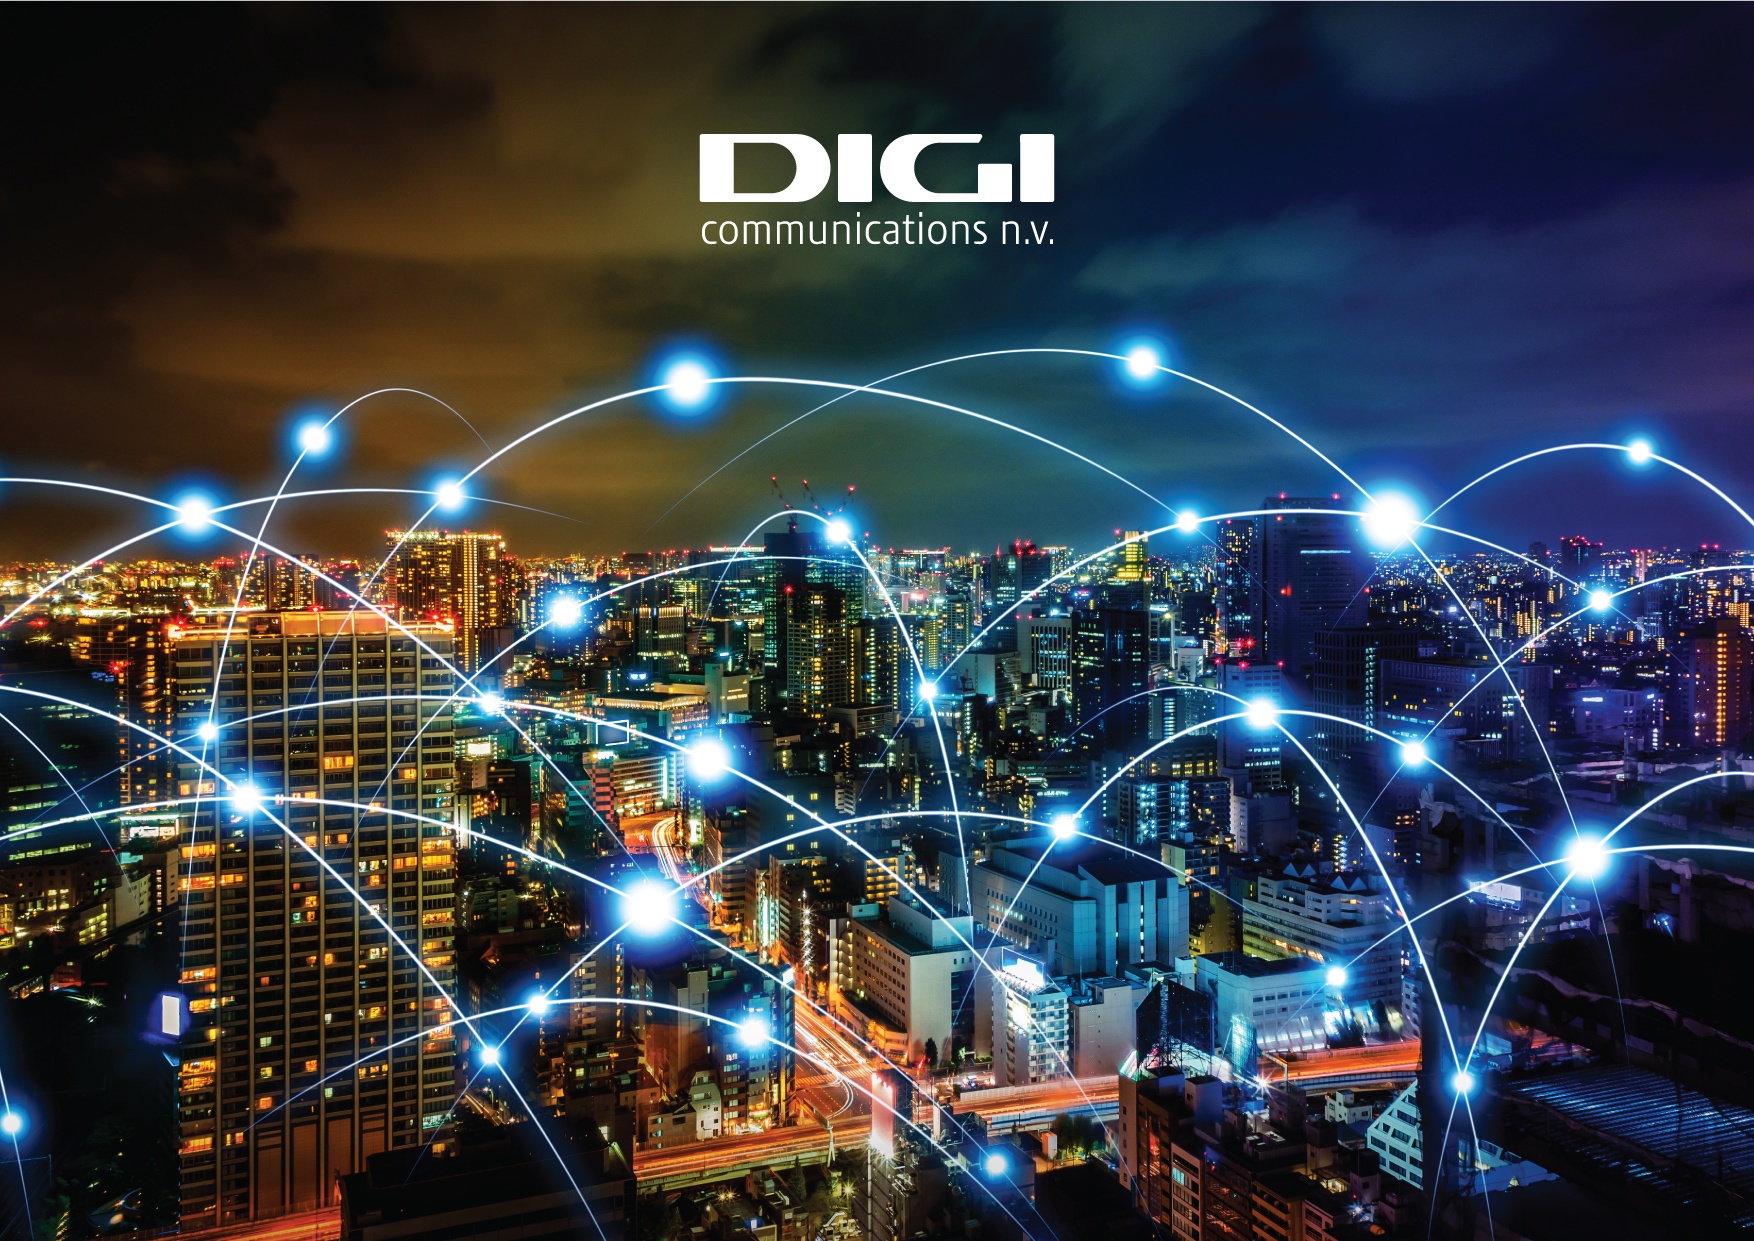 Digi Communications N.V. announces that its Belgian affiliated companies are moving ahead with their operations